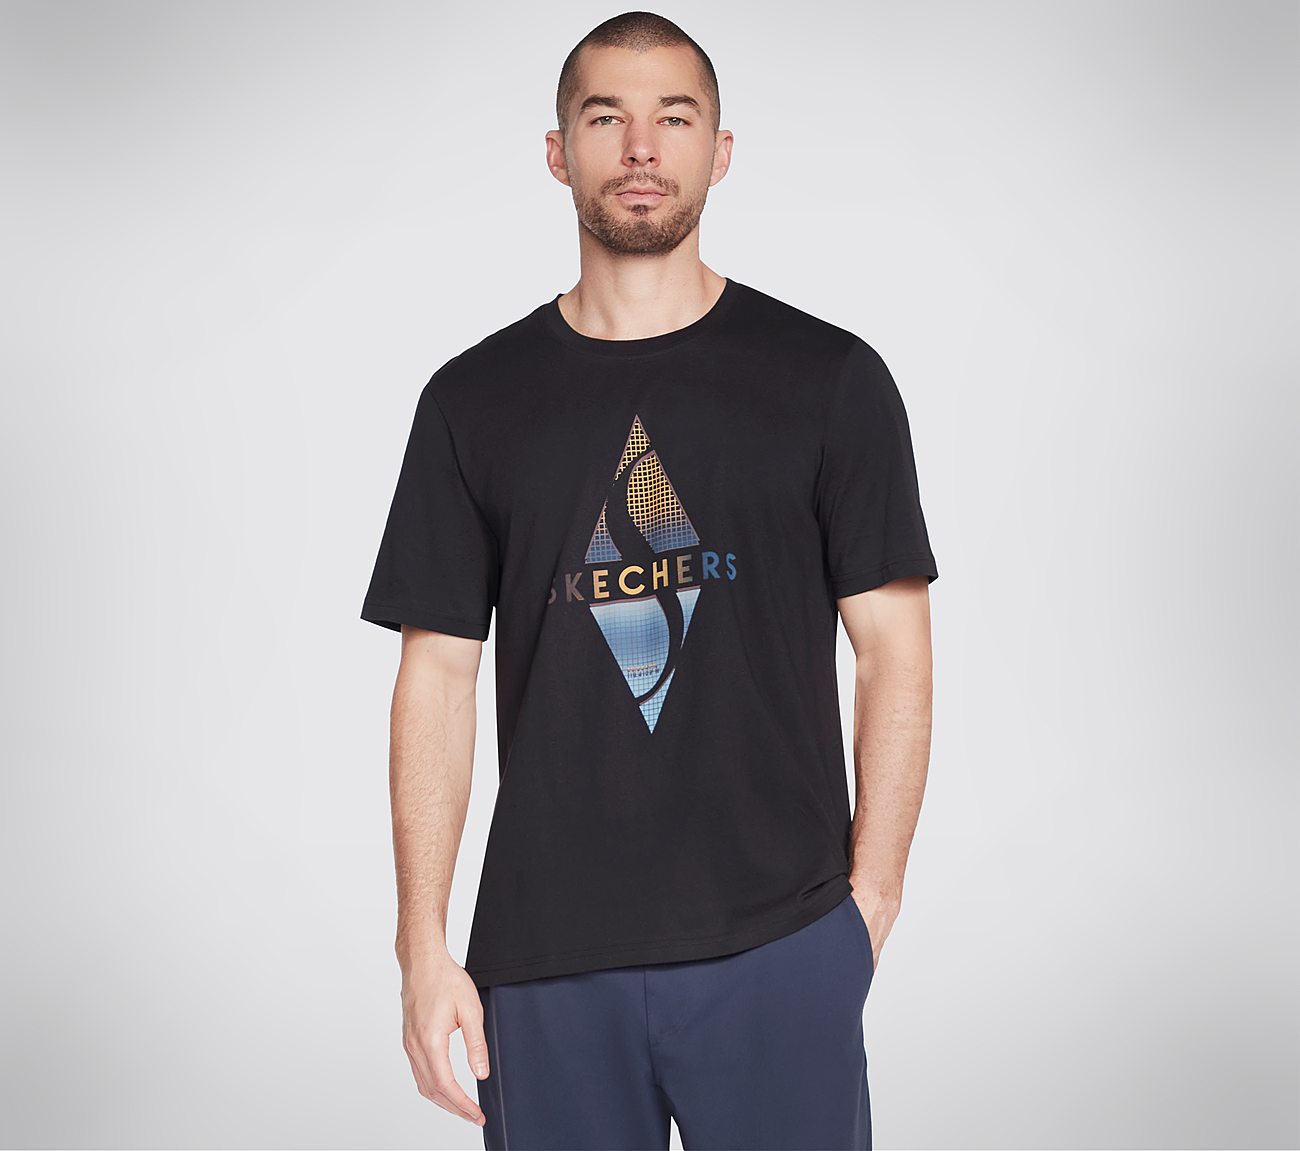 SKECHERS RECHARGE SS TEE, BBBBLACK Apparel Lateral View